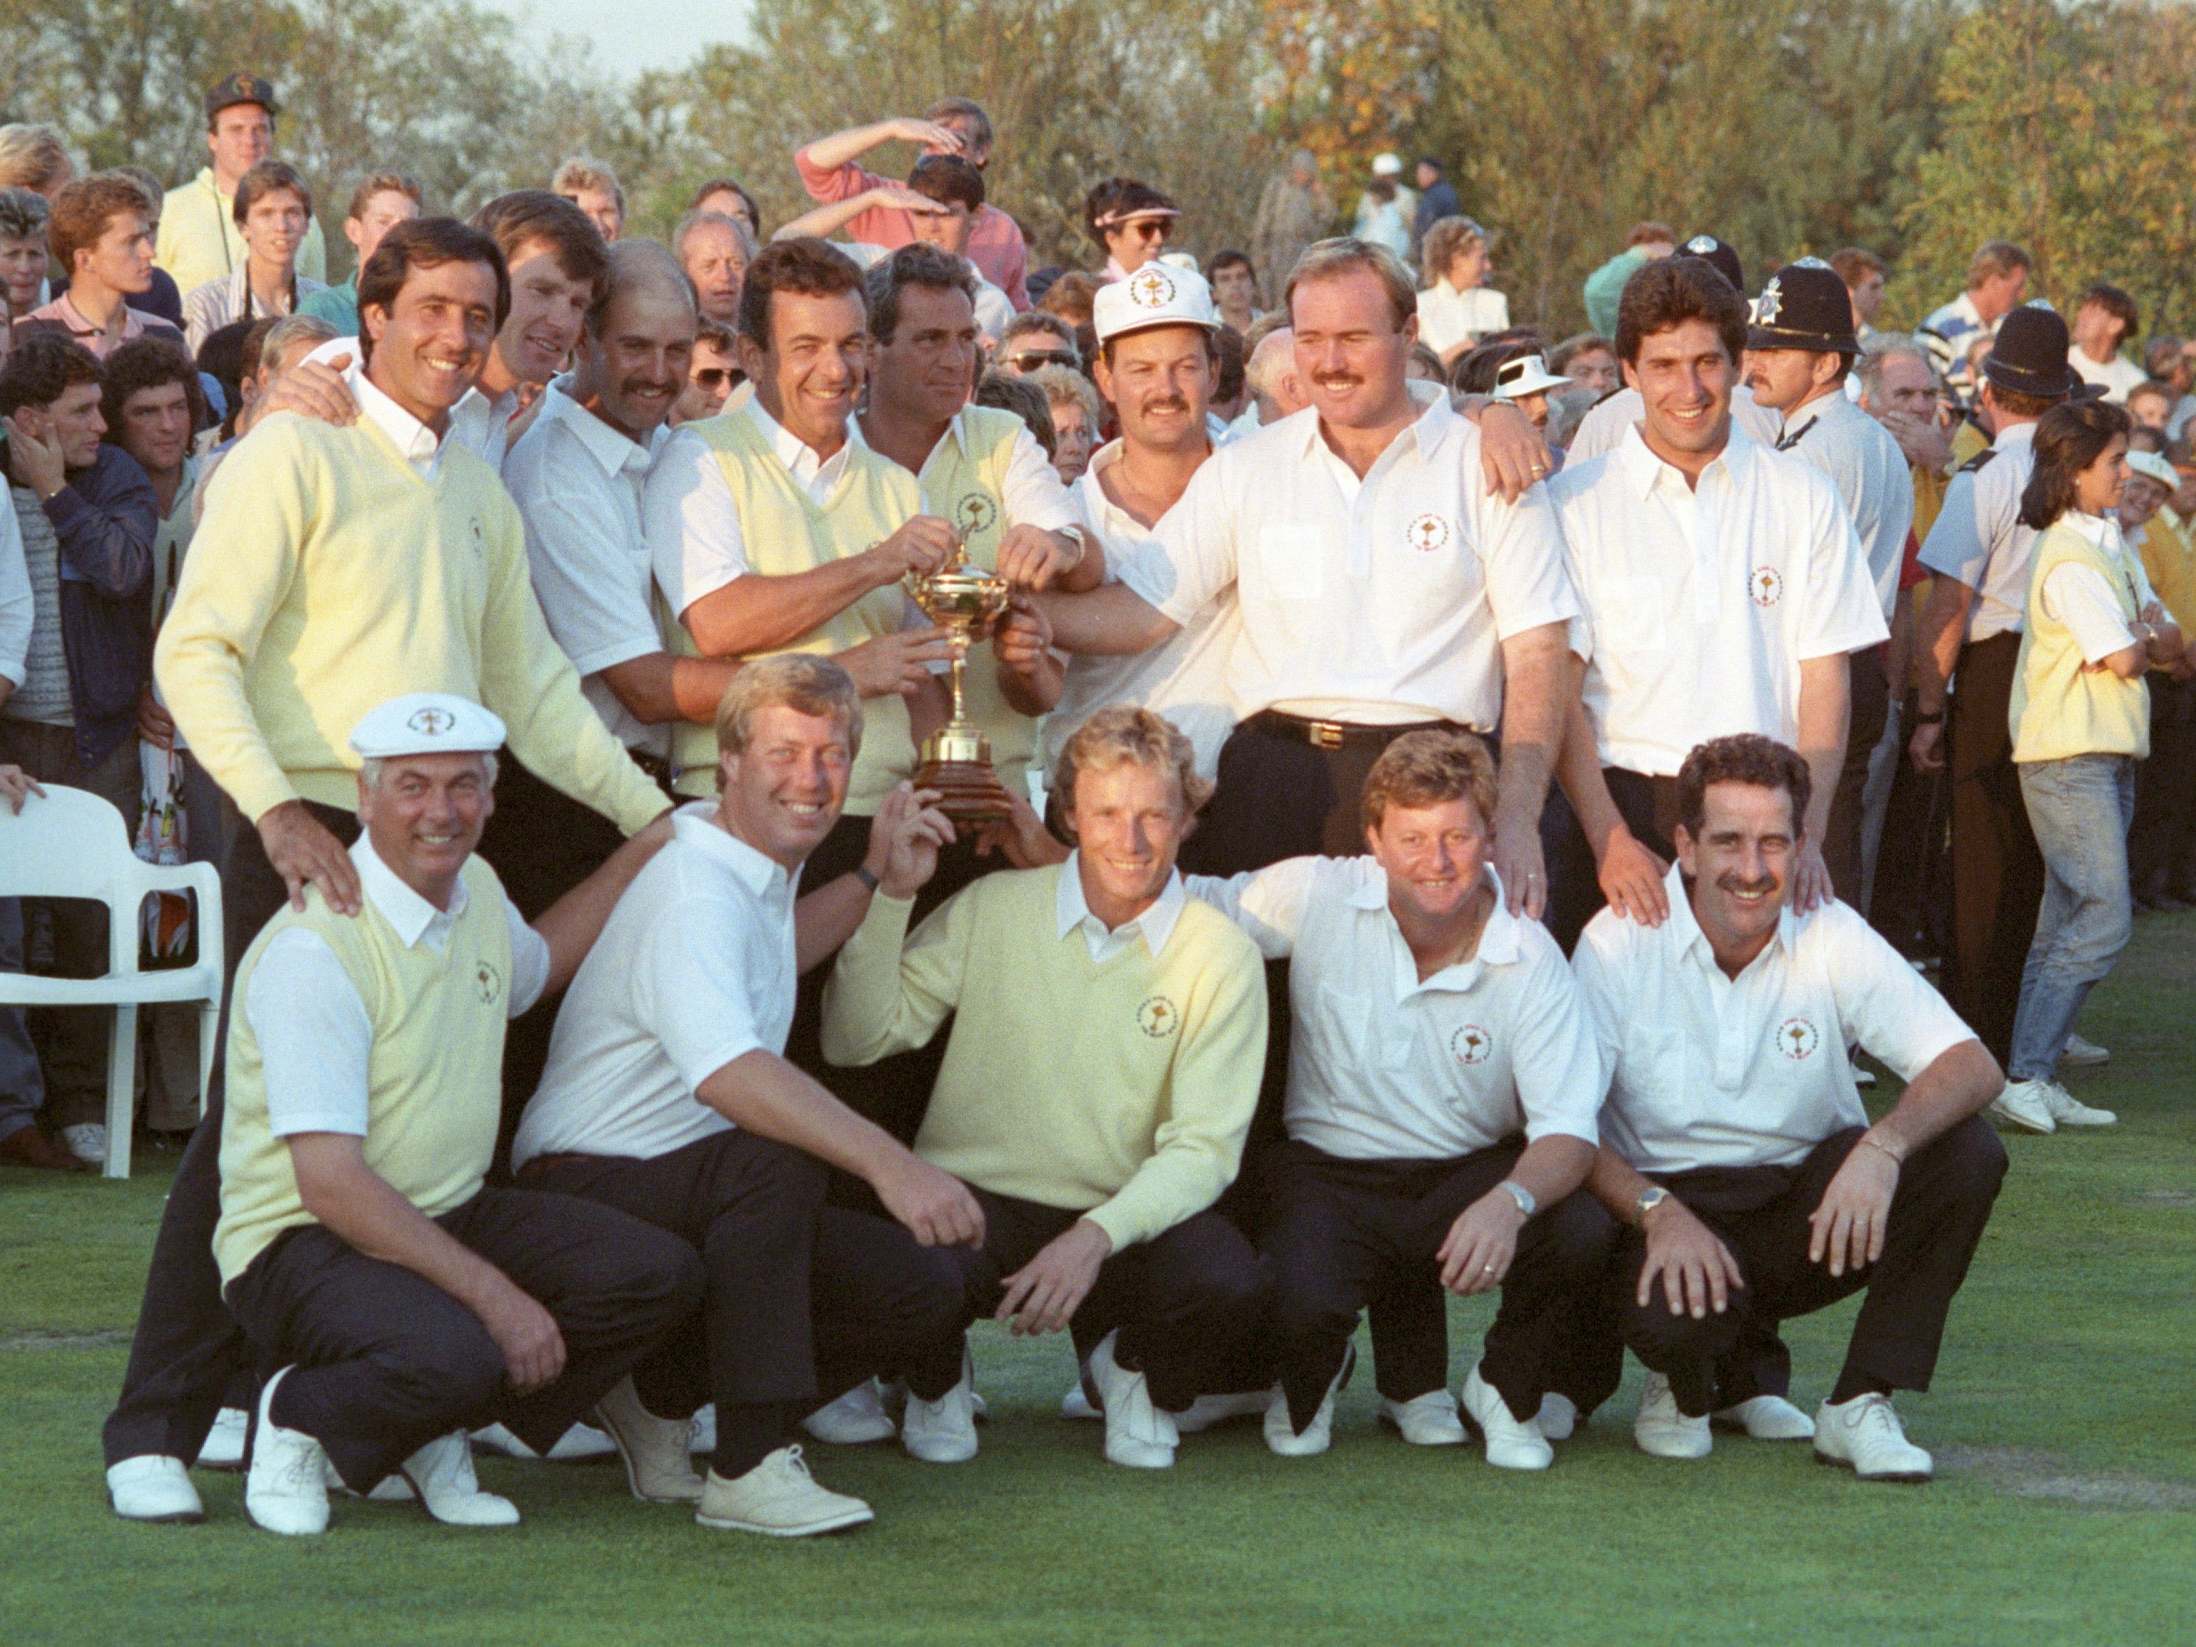 The European team (Brand back row, third from right) celebrate retaining the Ryder Cup in 1989